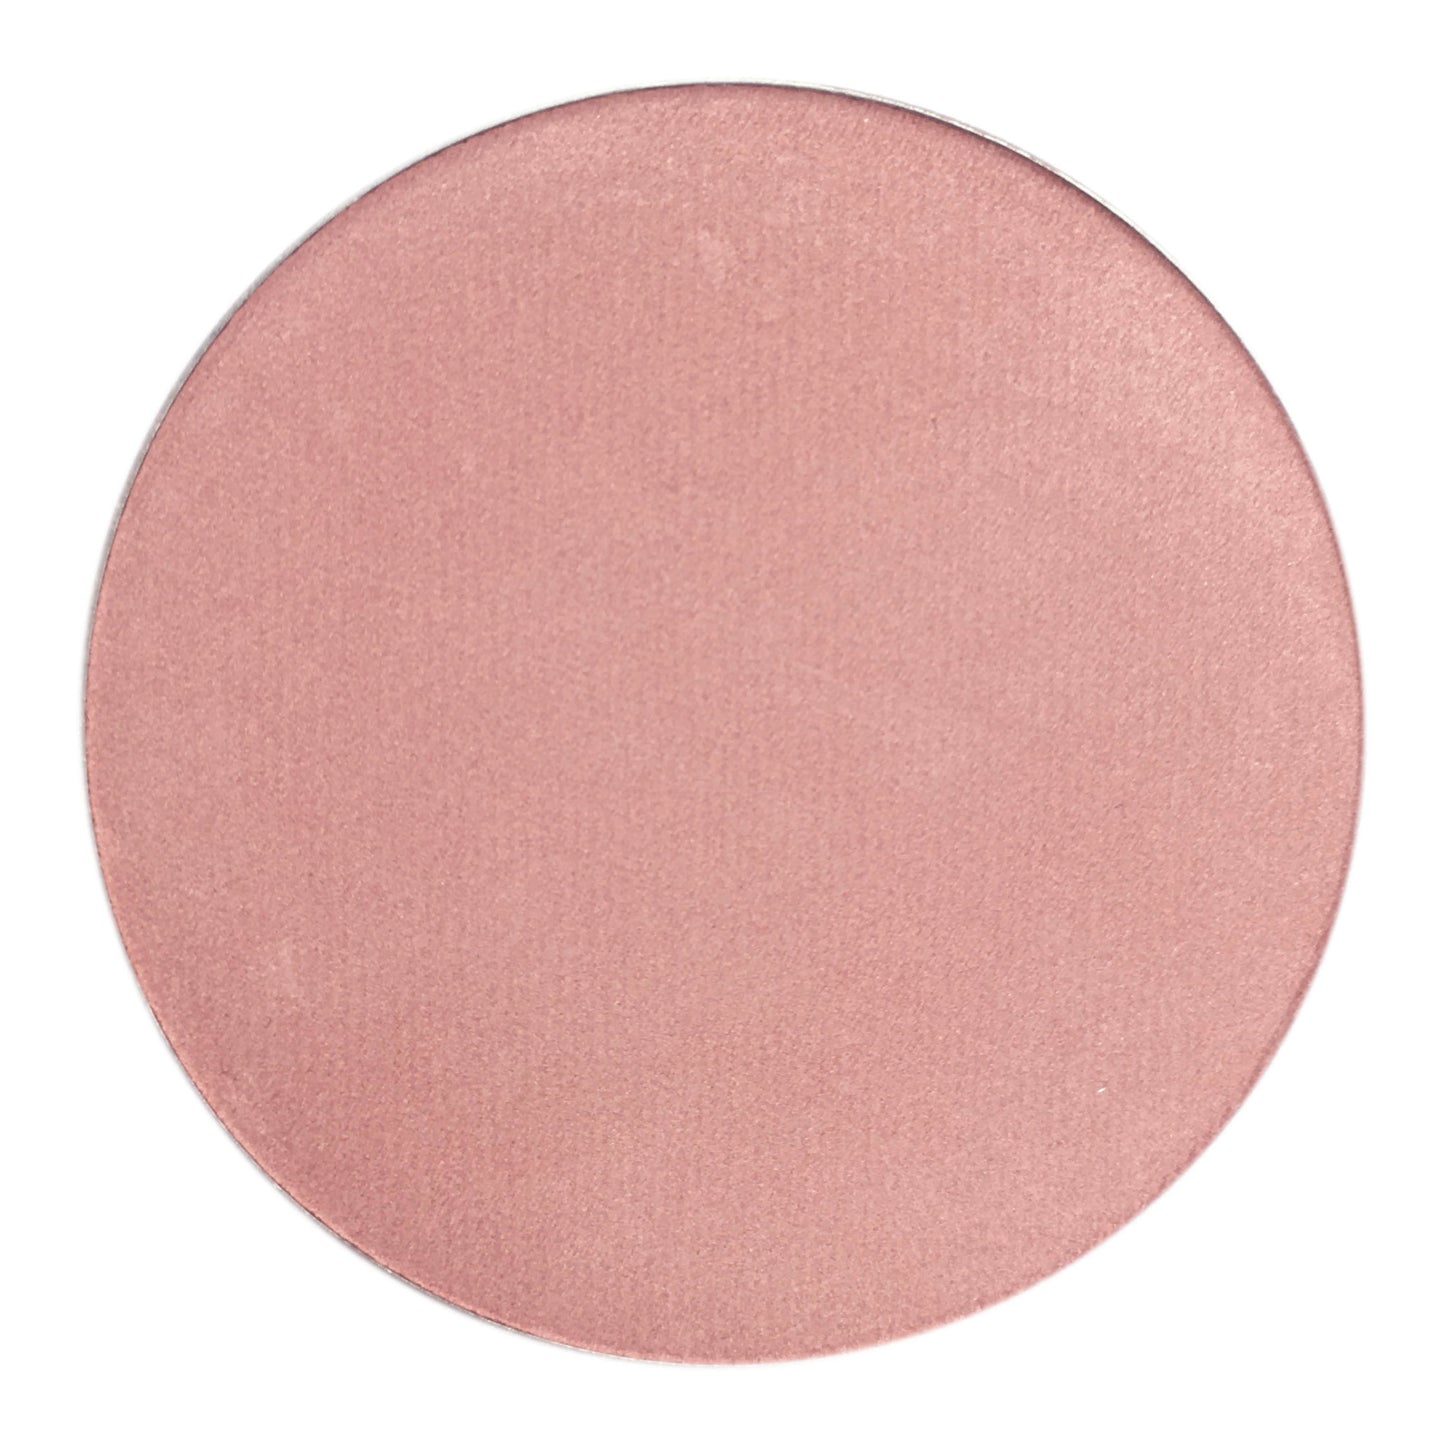 Pressed Mineral Cheek Colour - Sweet Pea - Compact